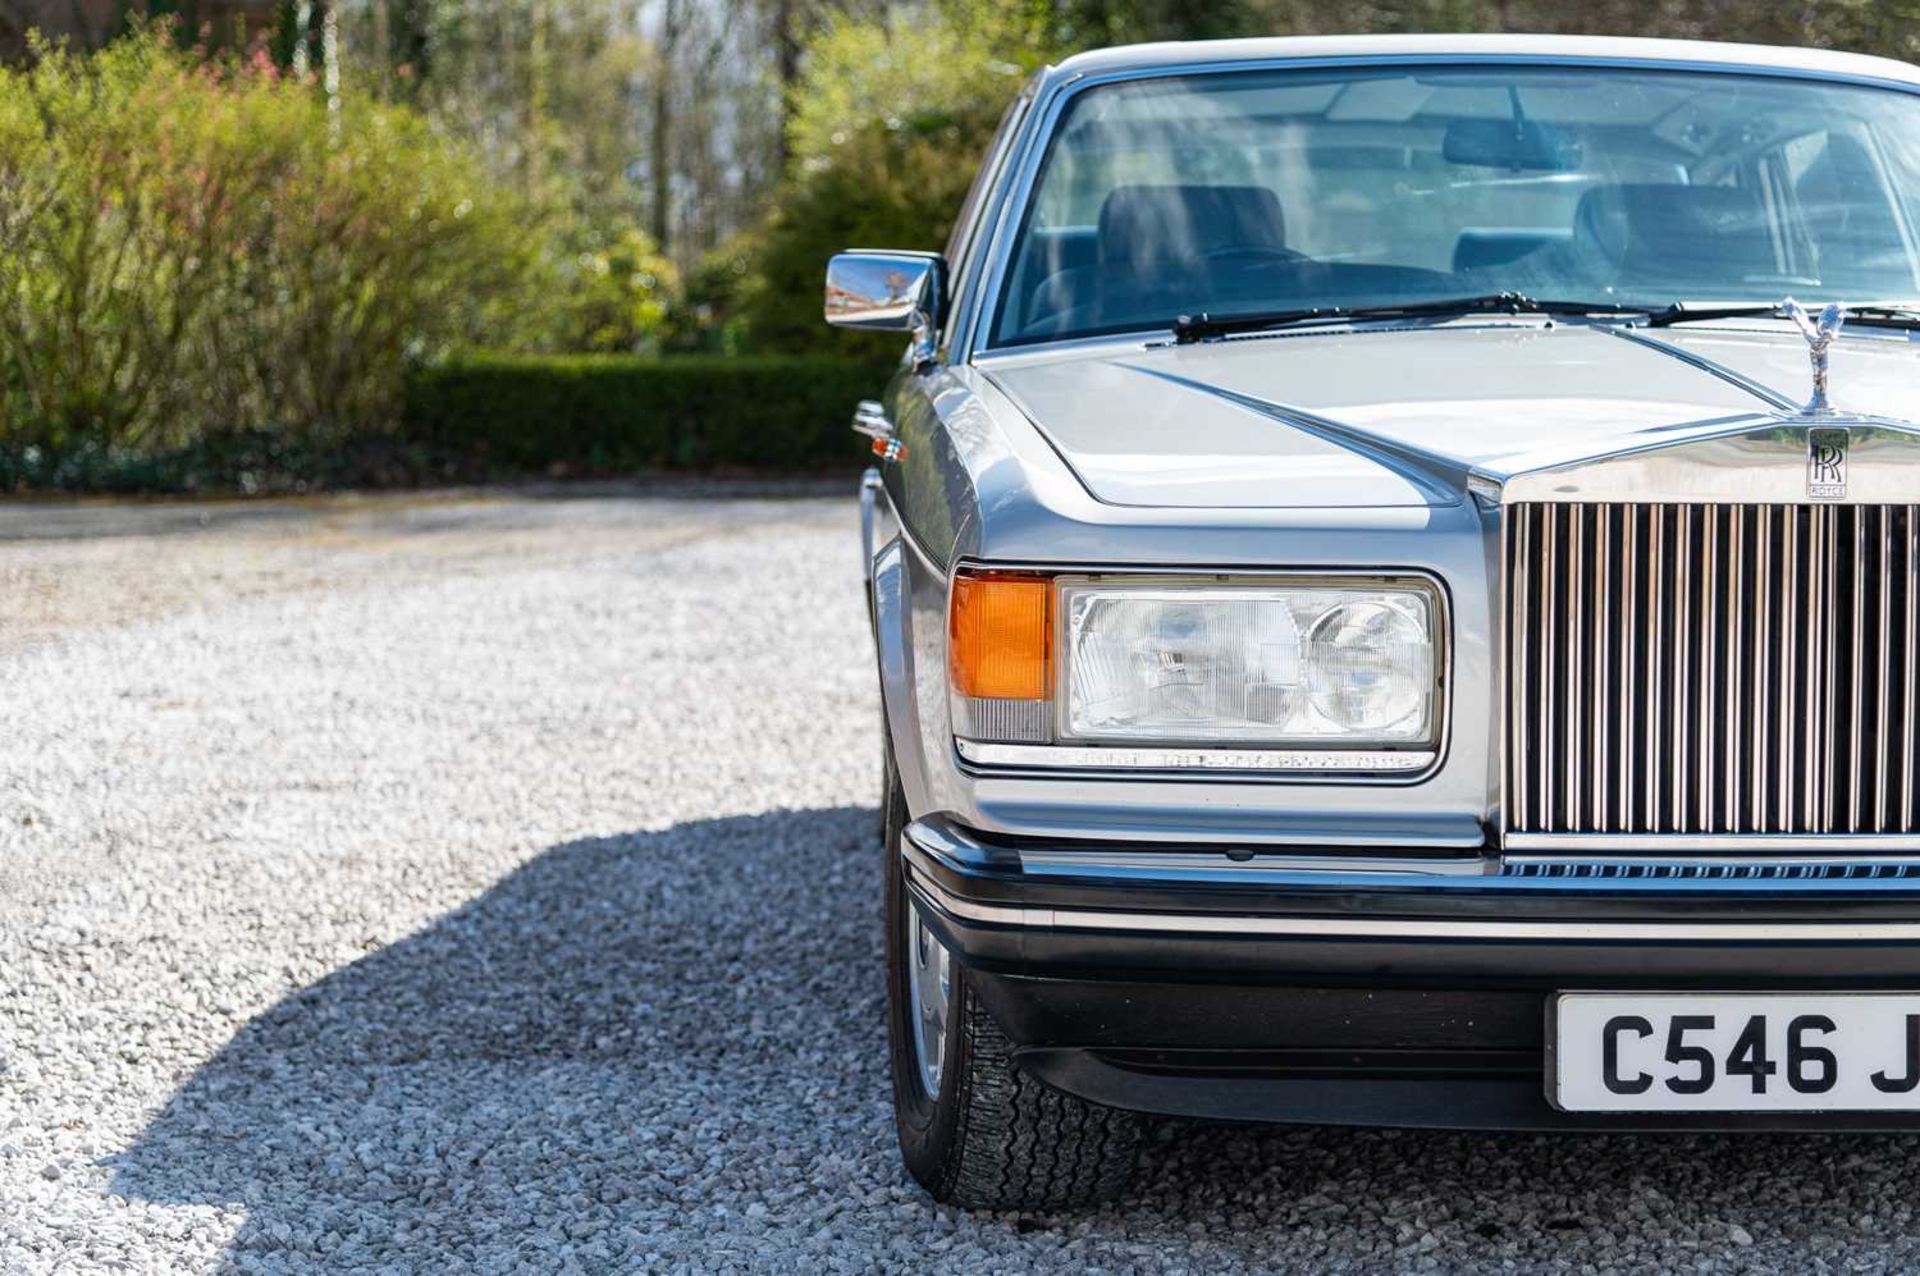 1985 Rolls Royce Silver Spirit From long term ownership, comes complete with comprehensive history f - Image 3 of 79